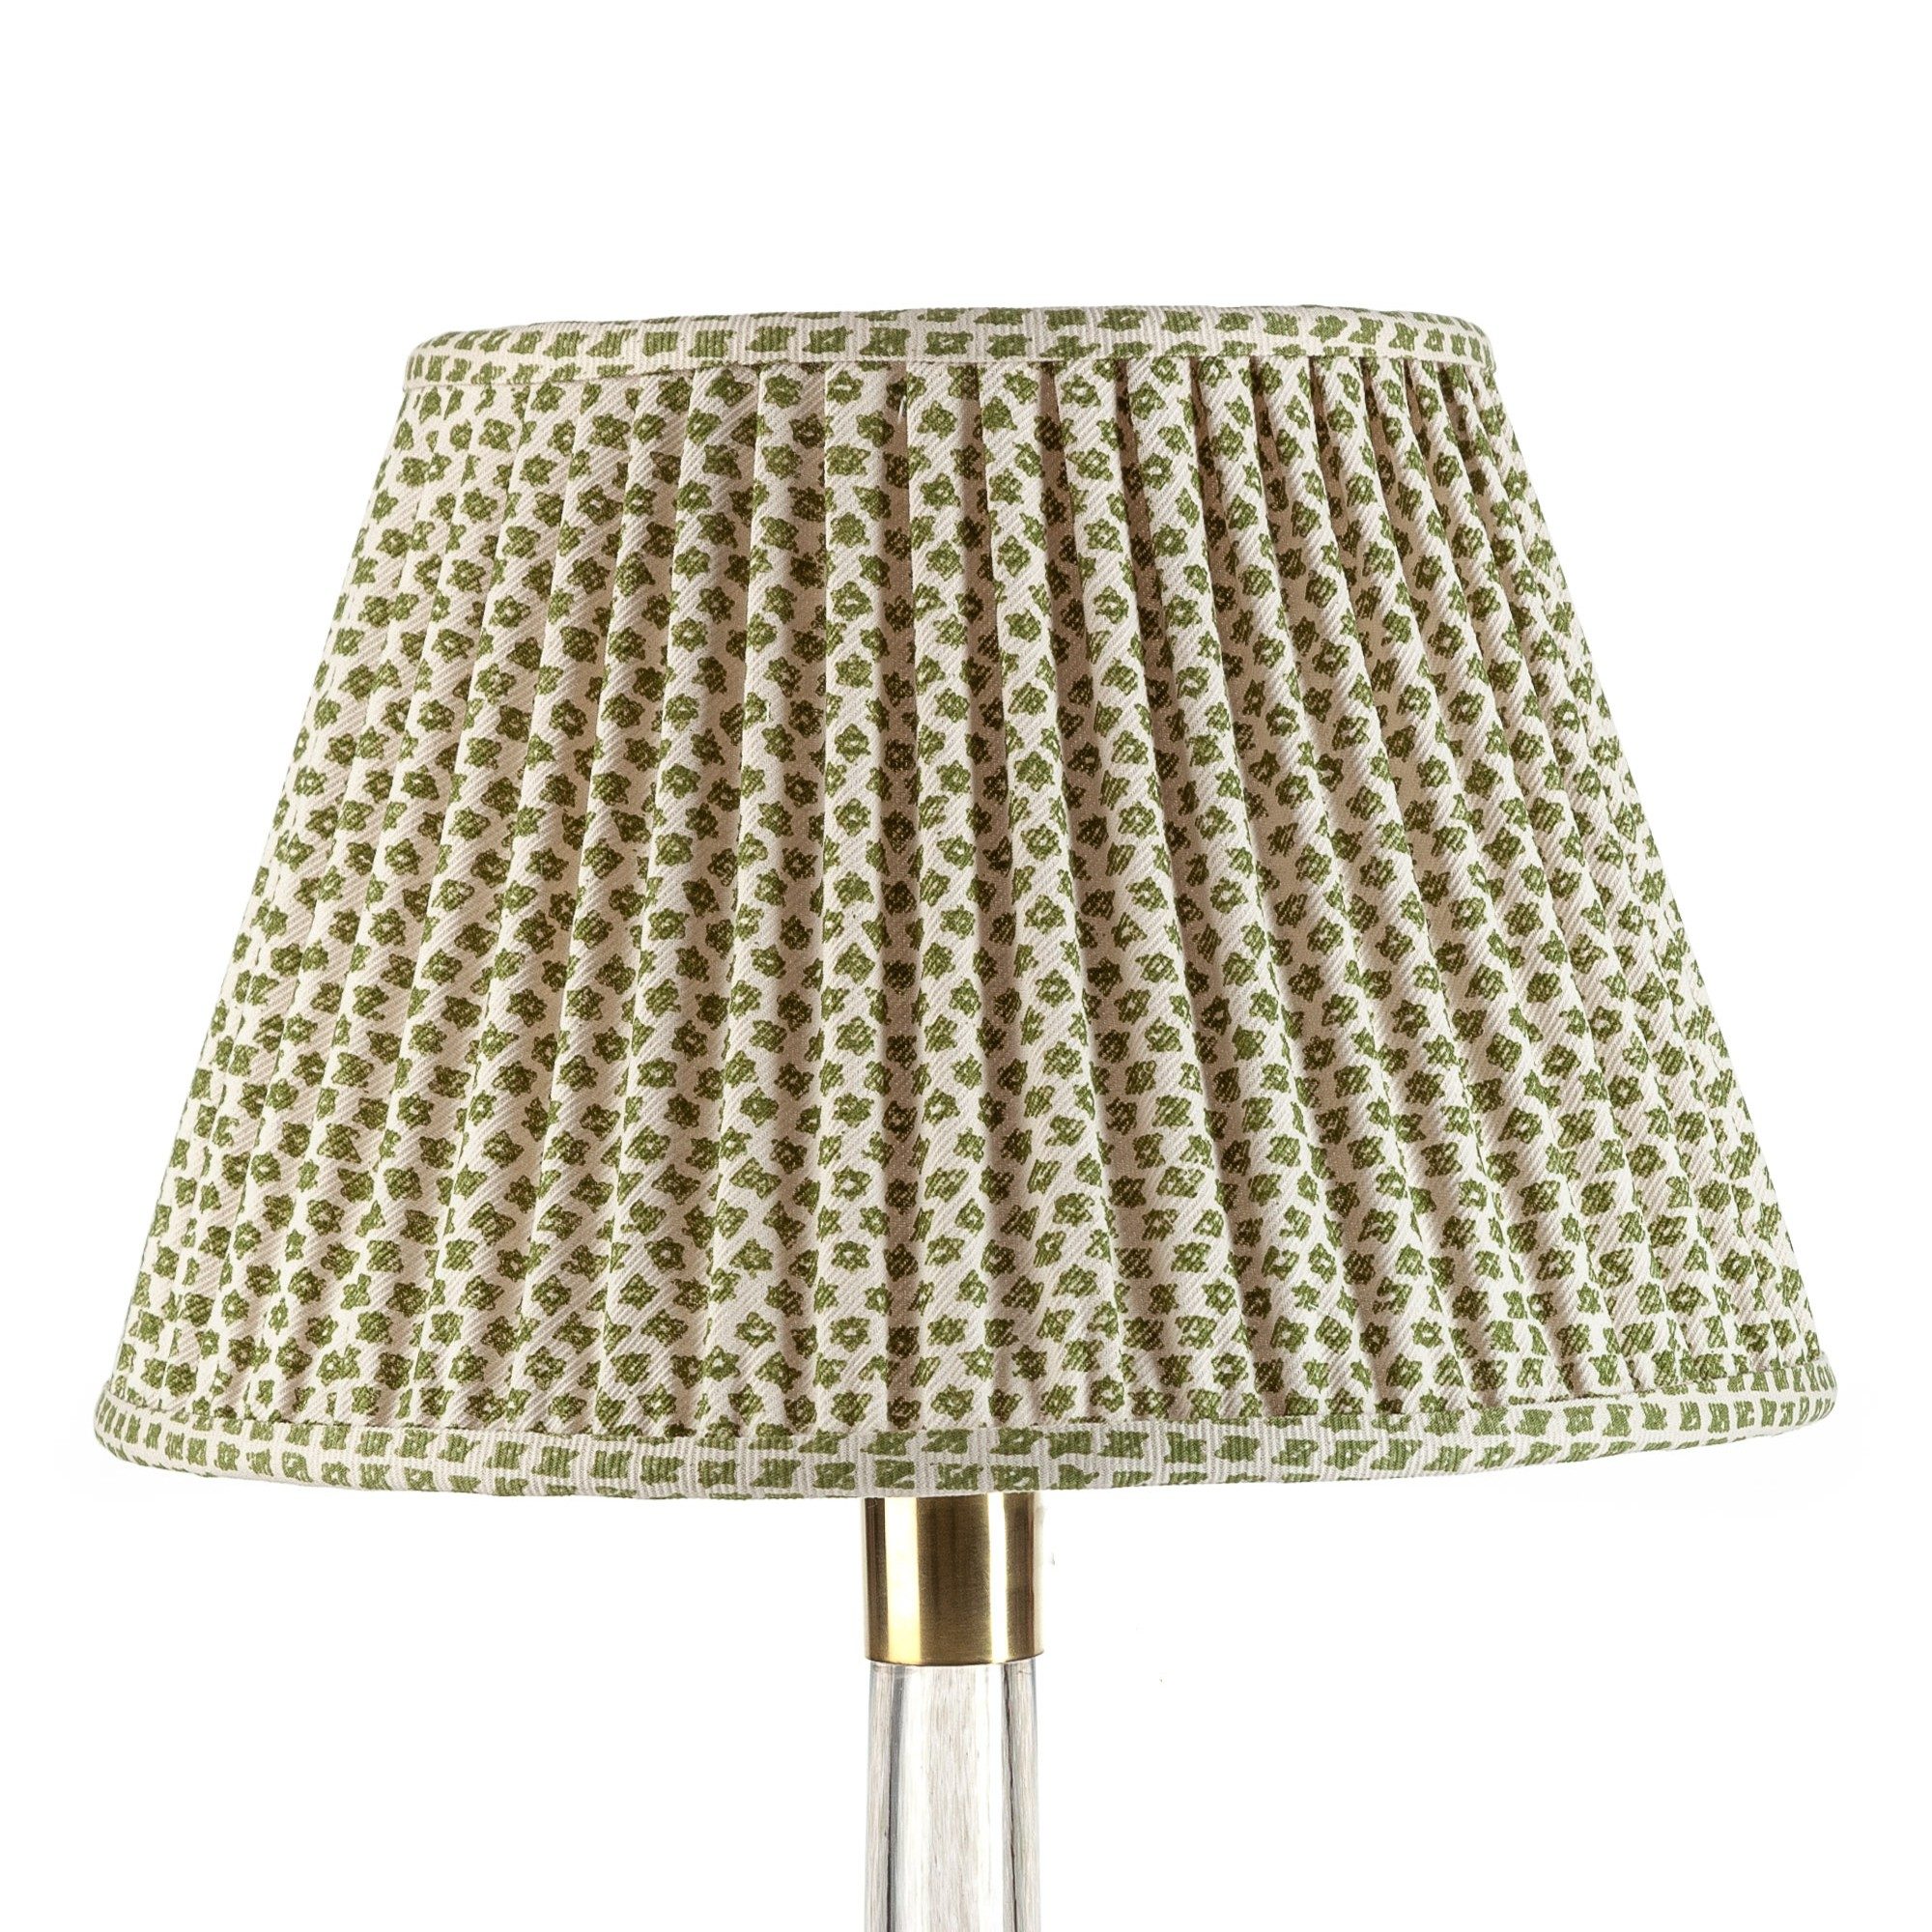 Lampshade in Green Marden